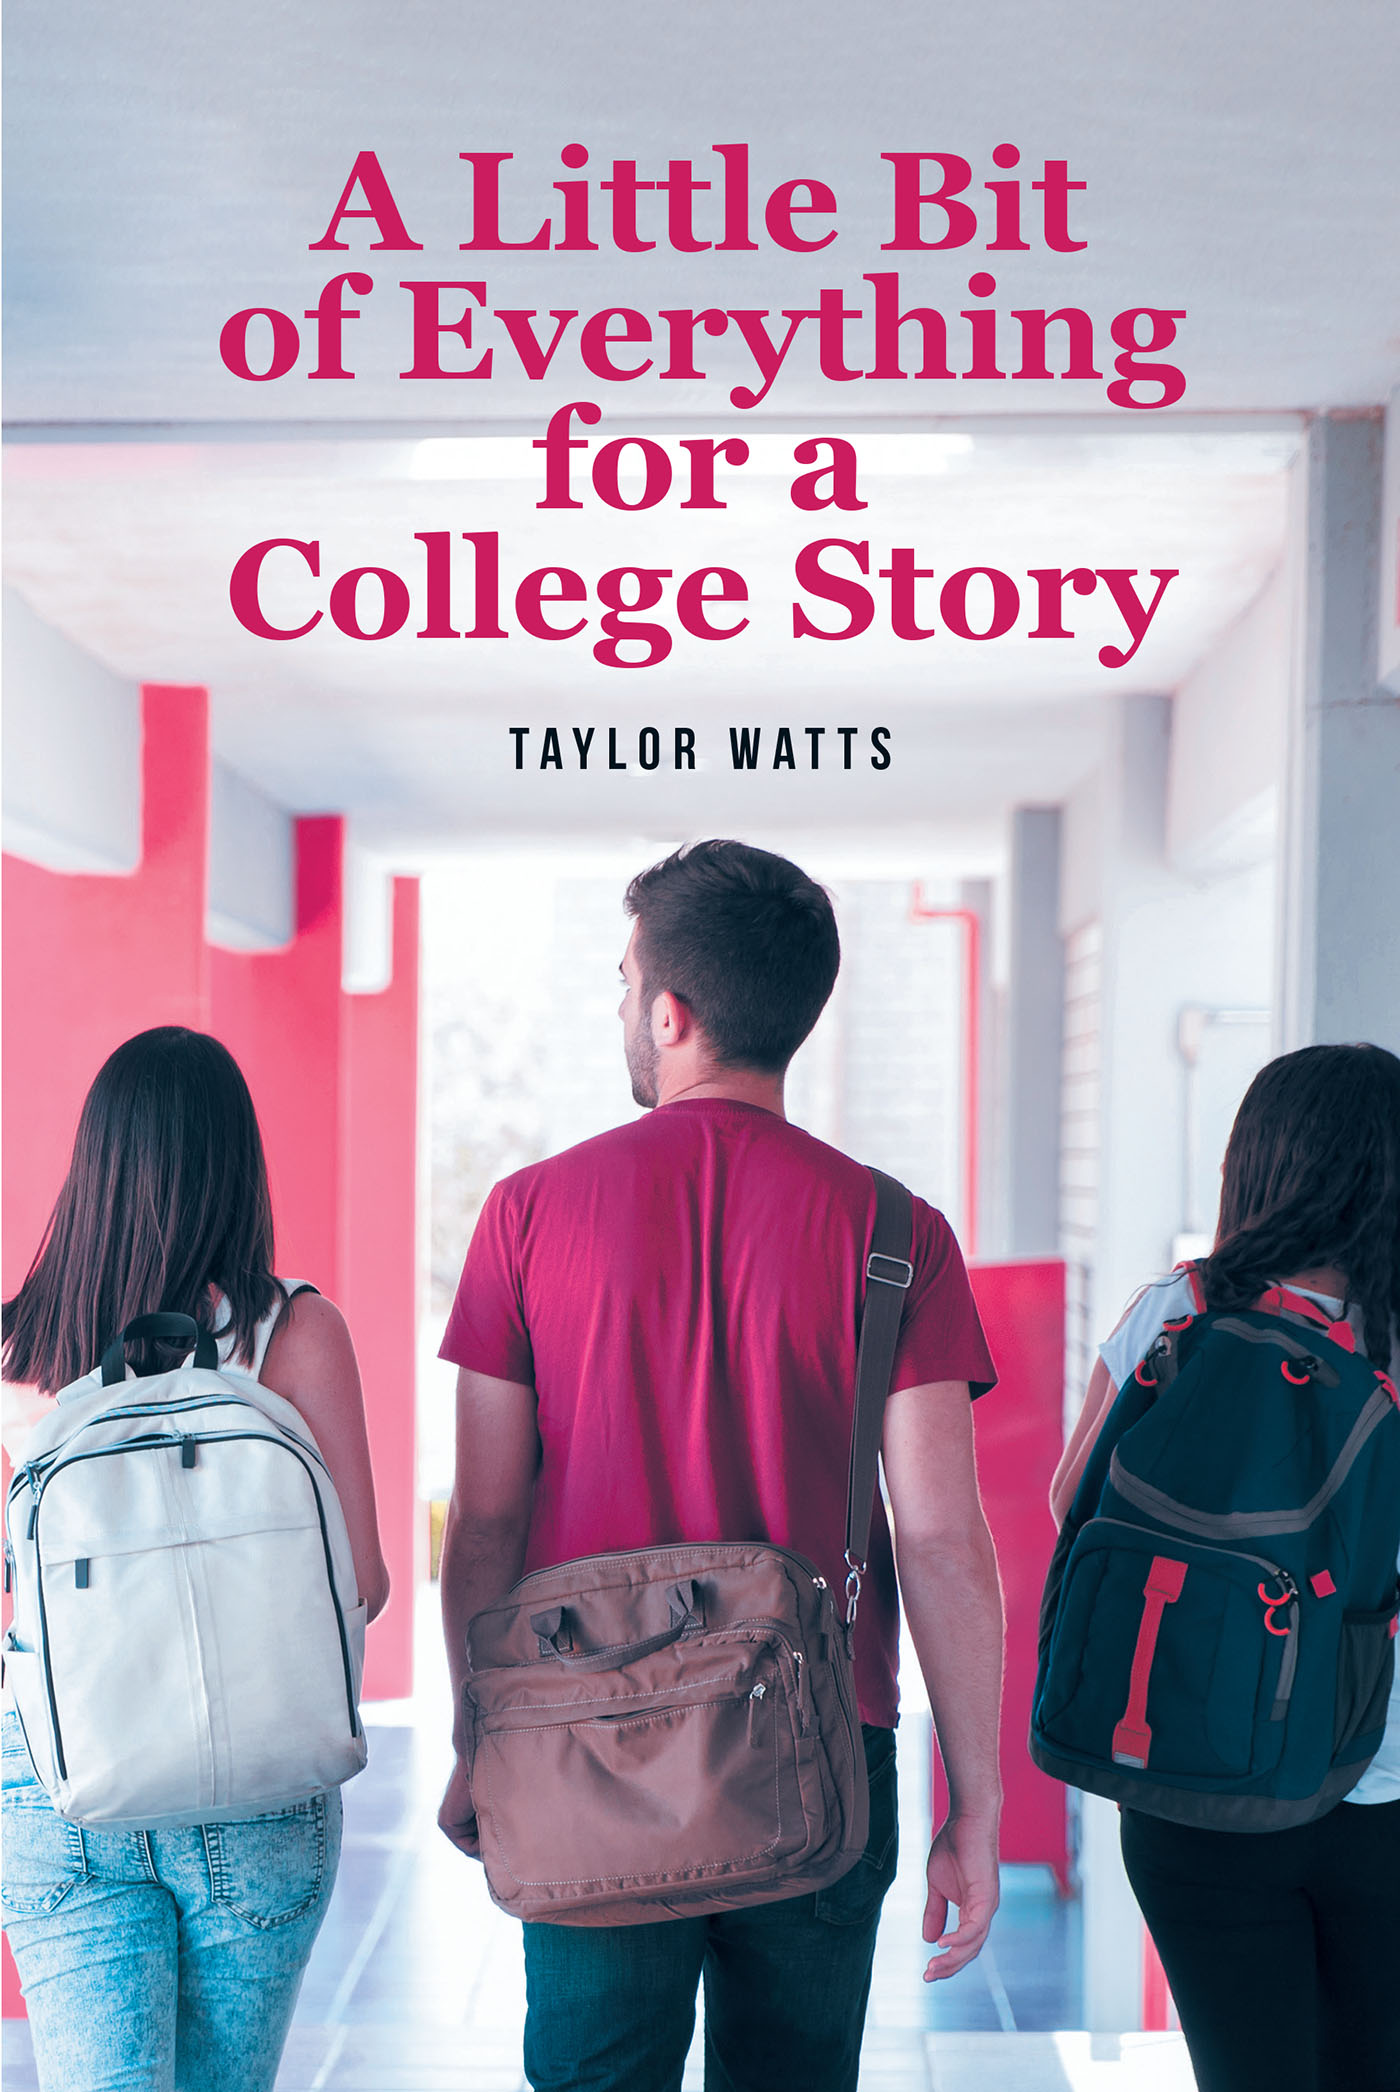 Taylor Watts’s New Book "A Little Bit of Everything for a College Story" Follows a College Student Who Notices Her Best Friend Grow Jealous After She Begins Dating a Boy